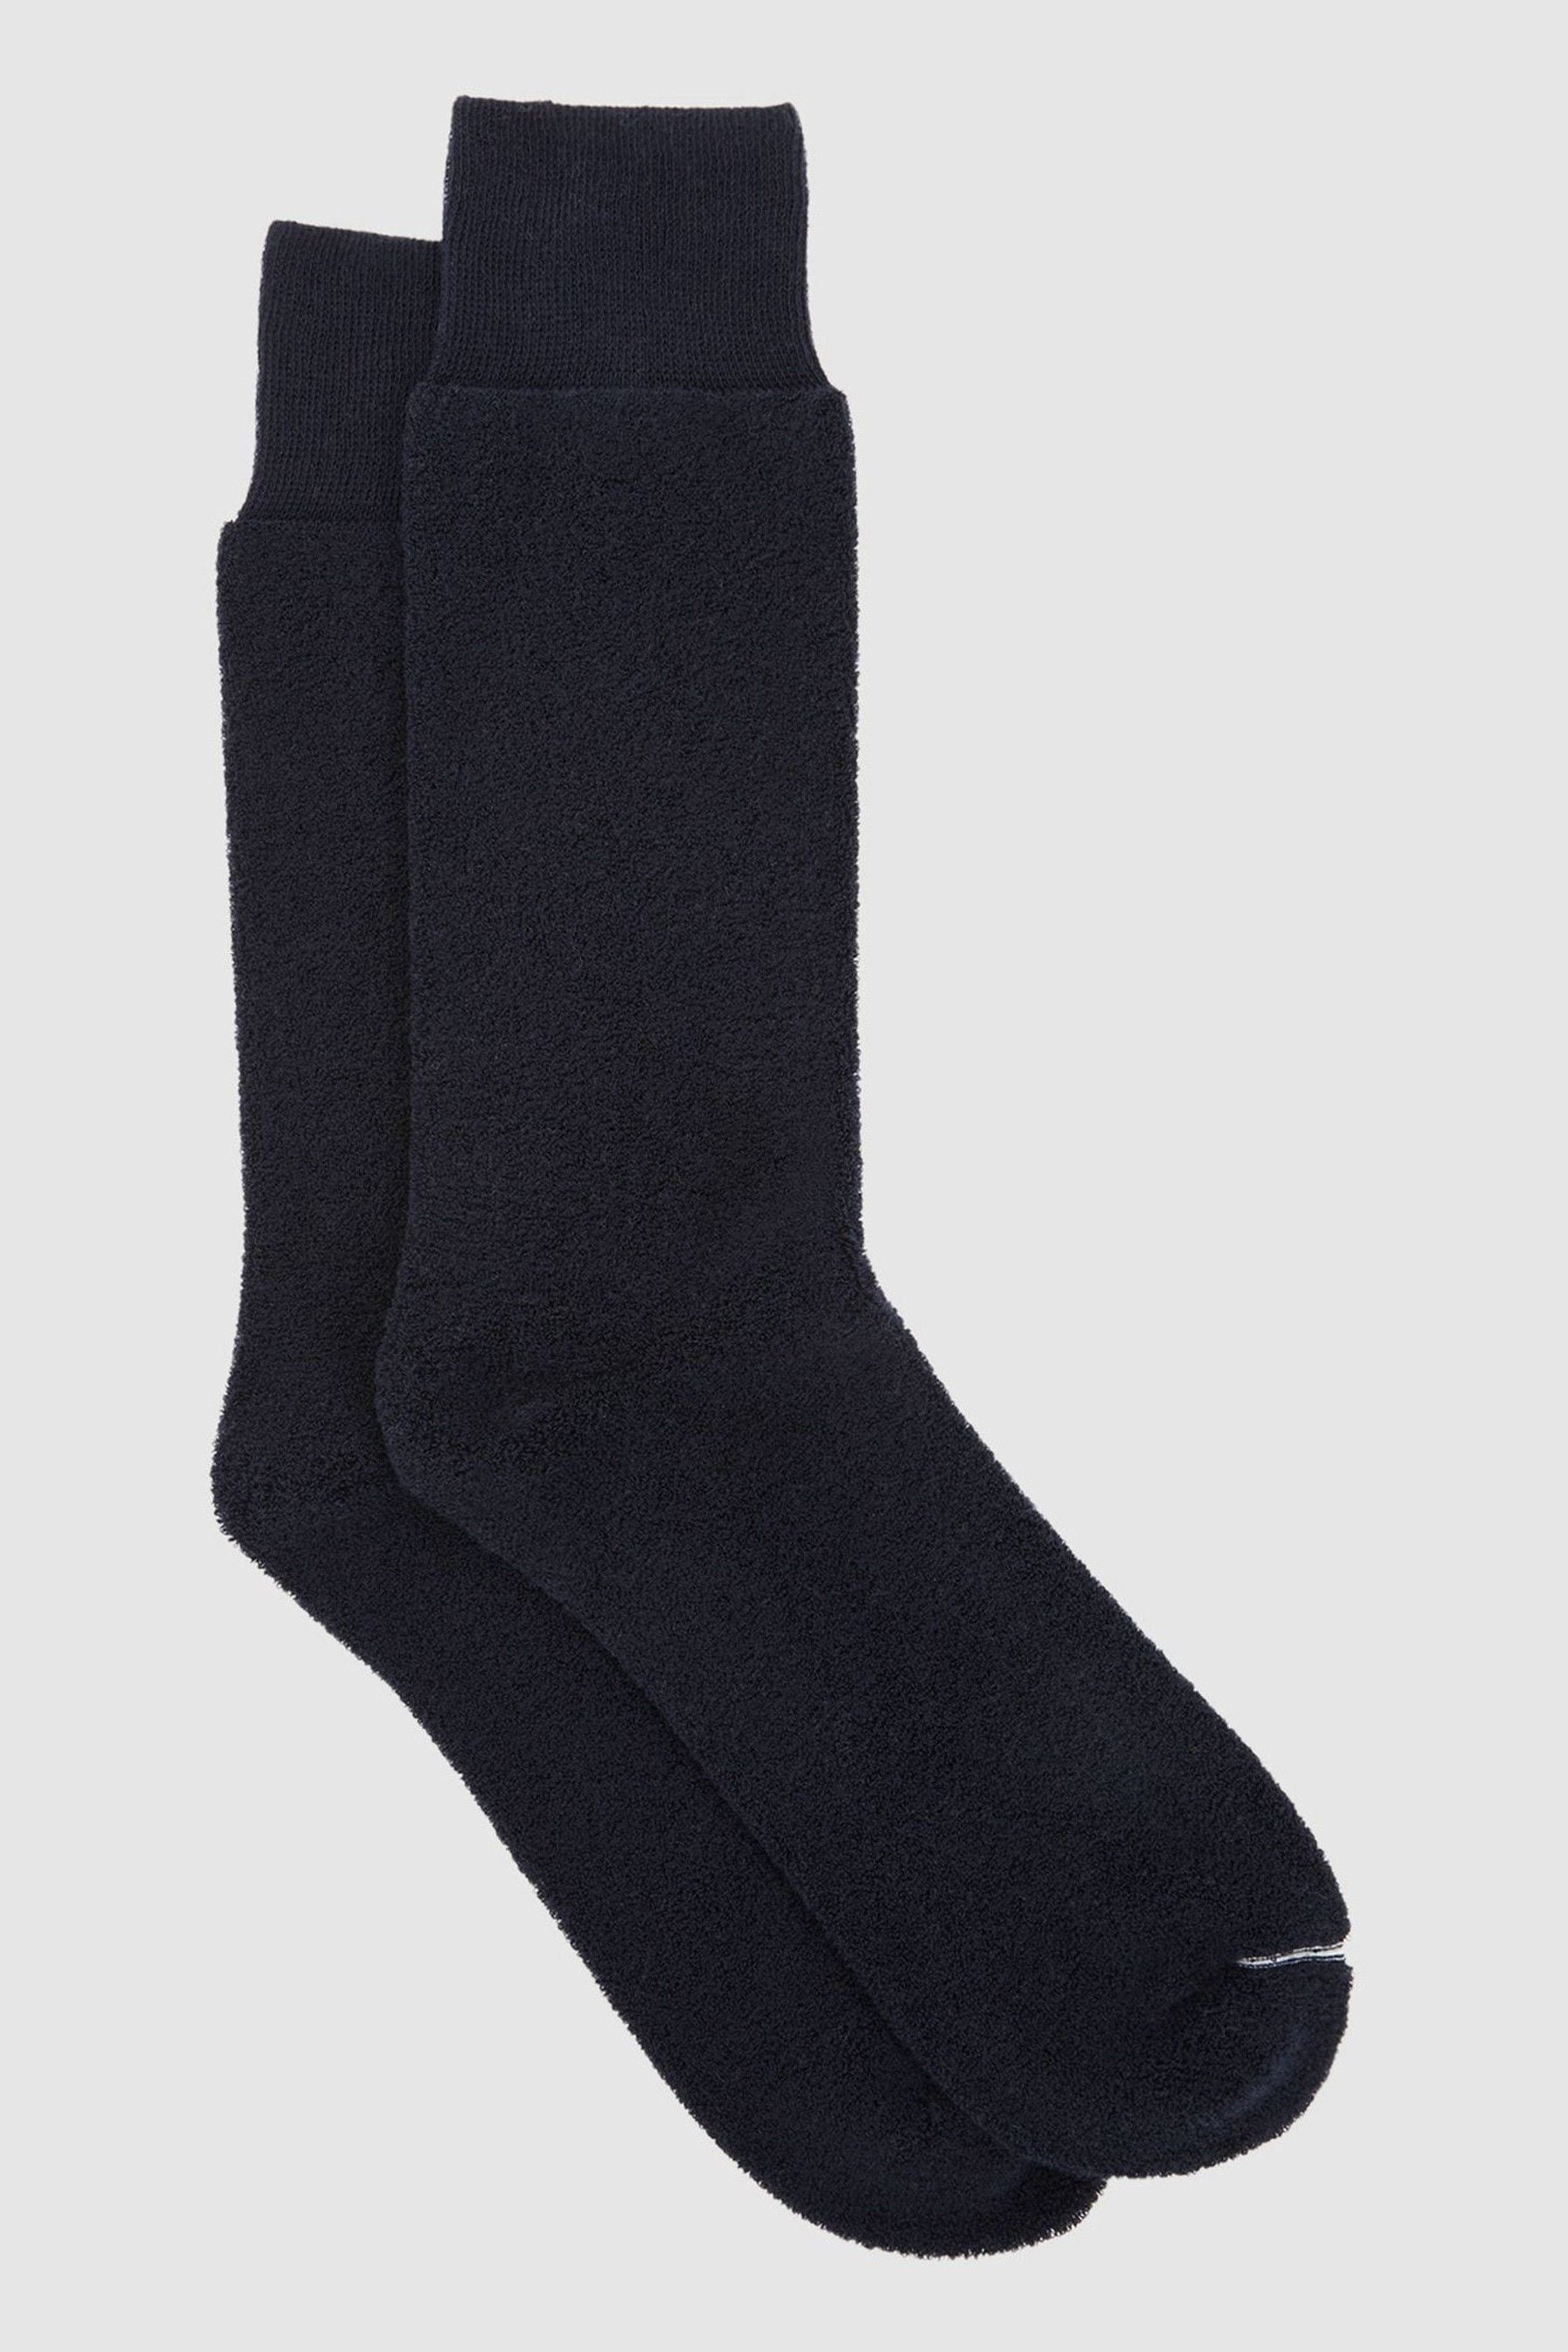 Reiss Alers - Navy Cotton Blend Terry Towelling Socks, Uk S-m